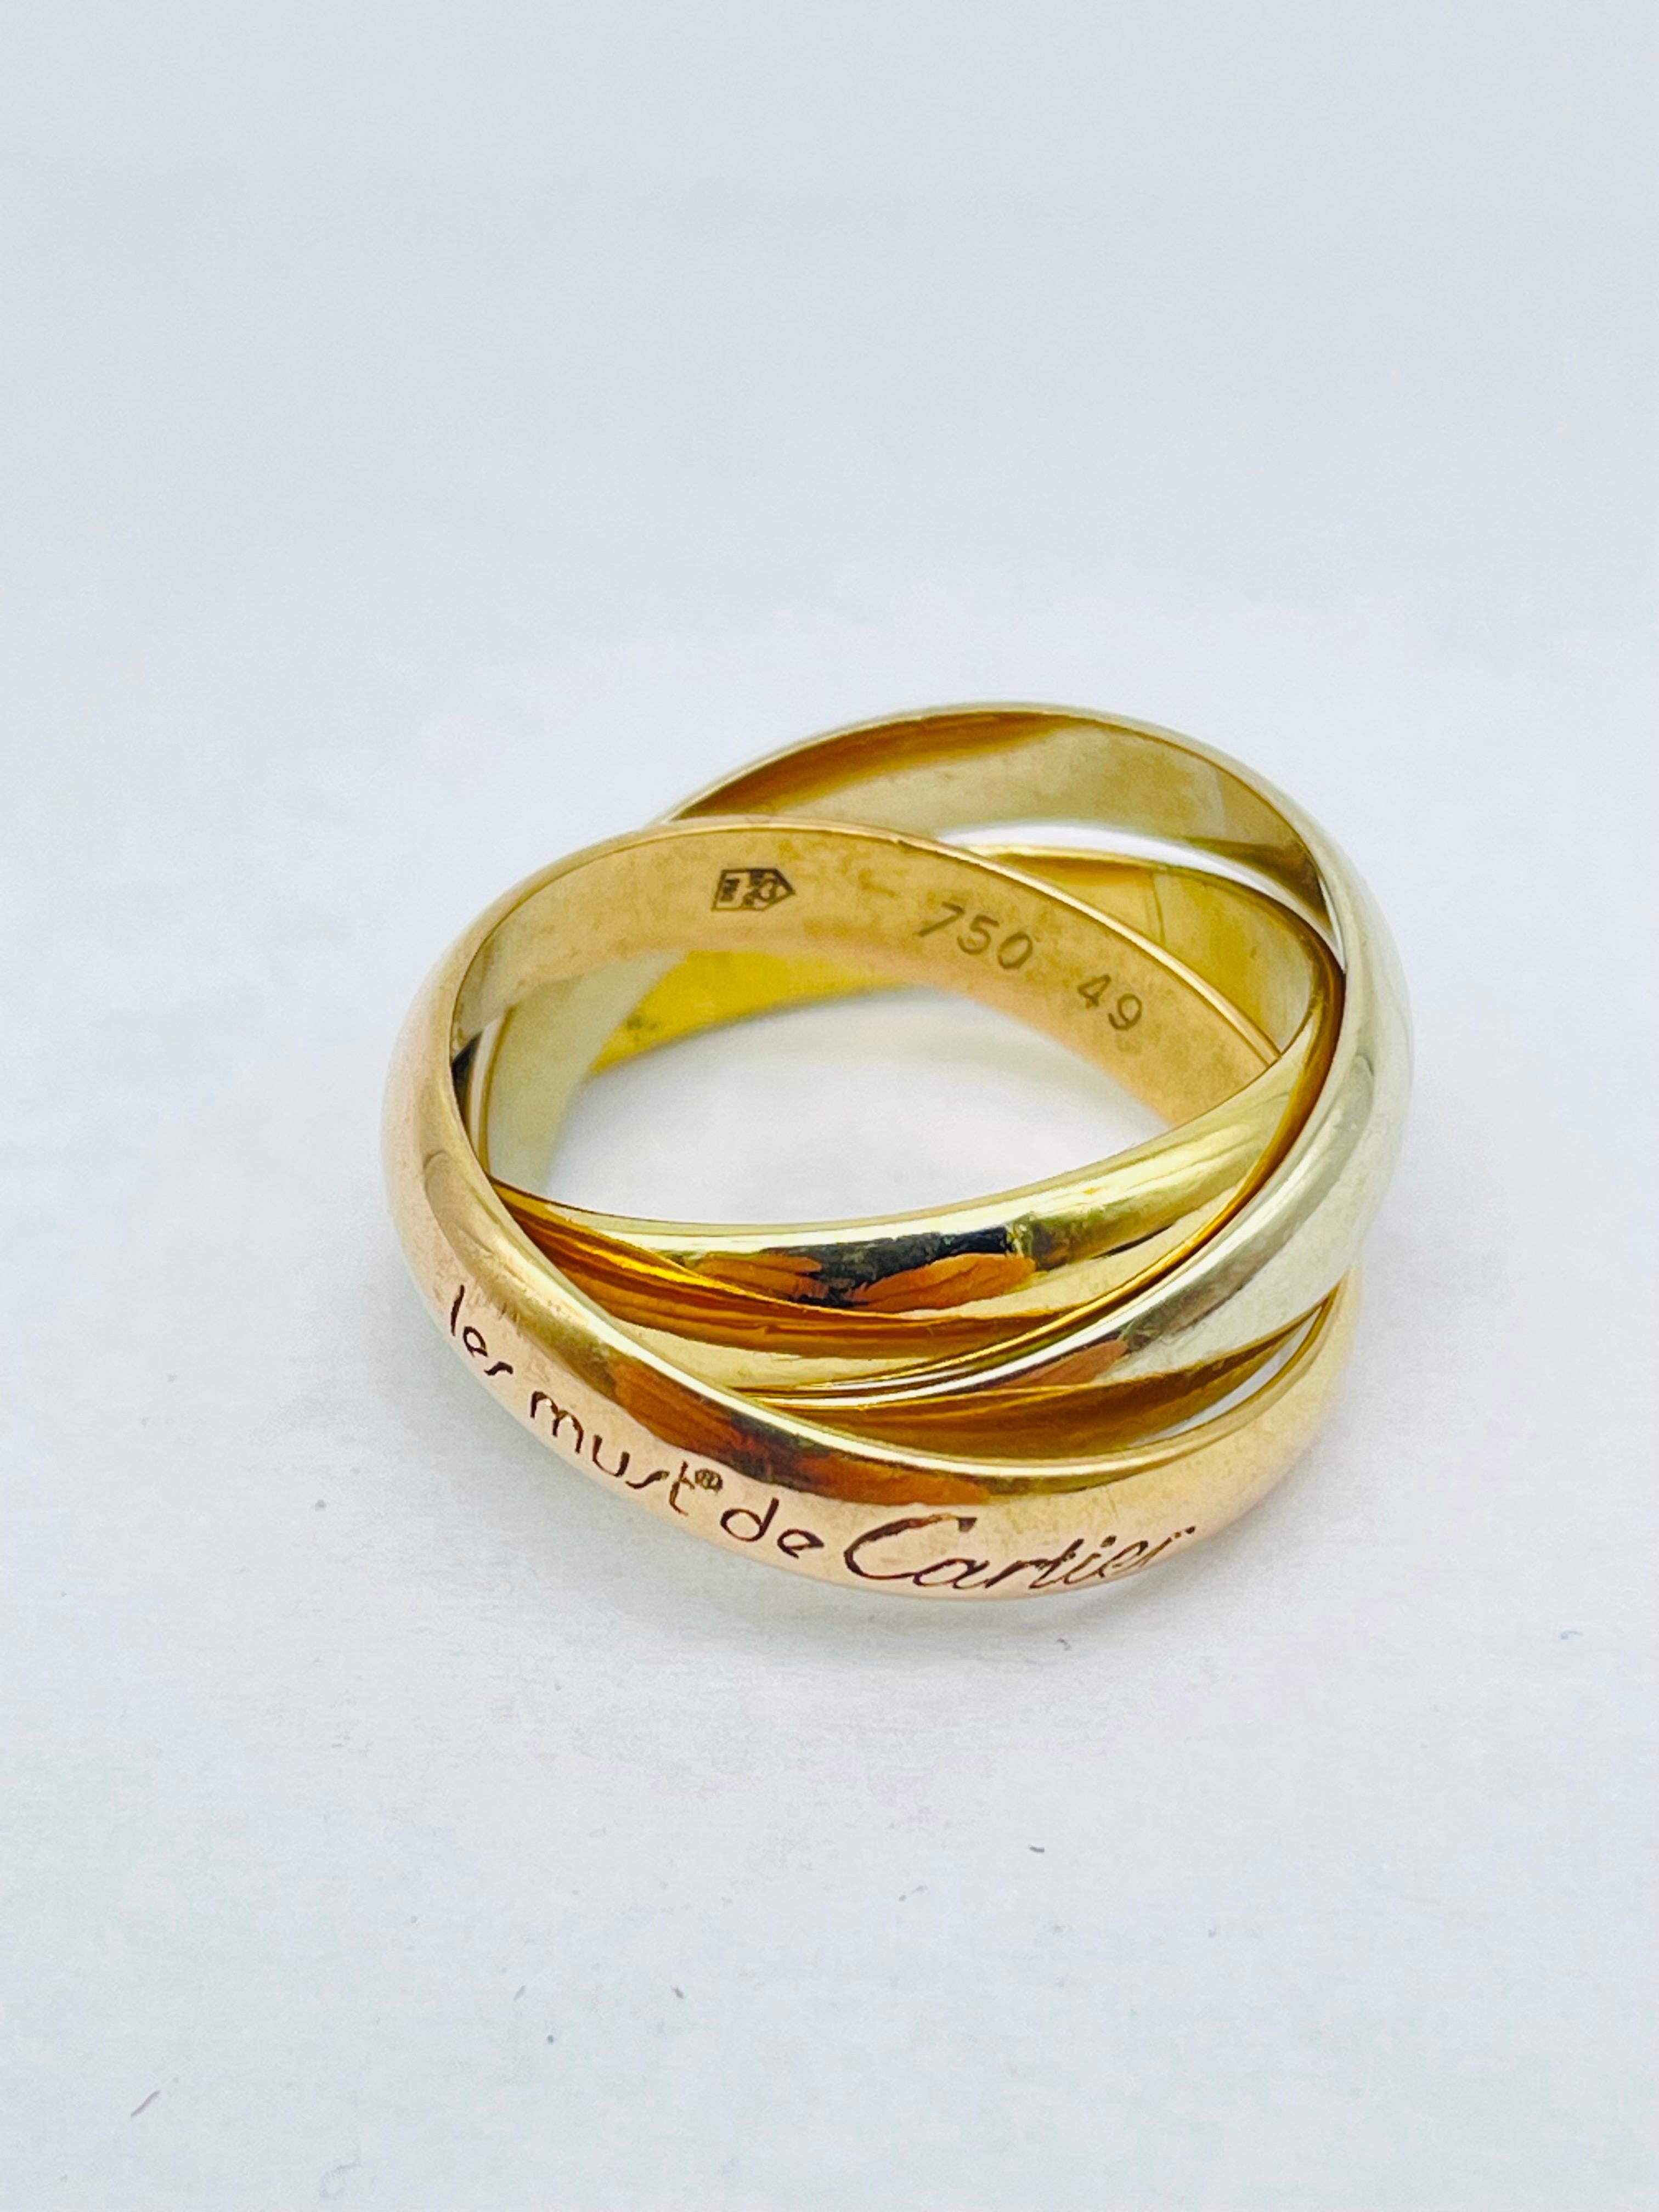 Cartier Trinity Ring in 18k 3 Tone 'Tricolor' Gold In Good Condition For Sale In Berlin, BE